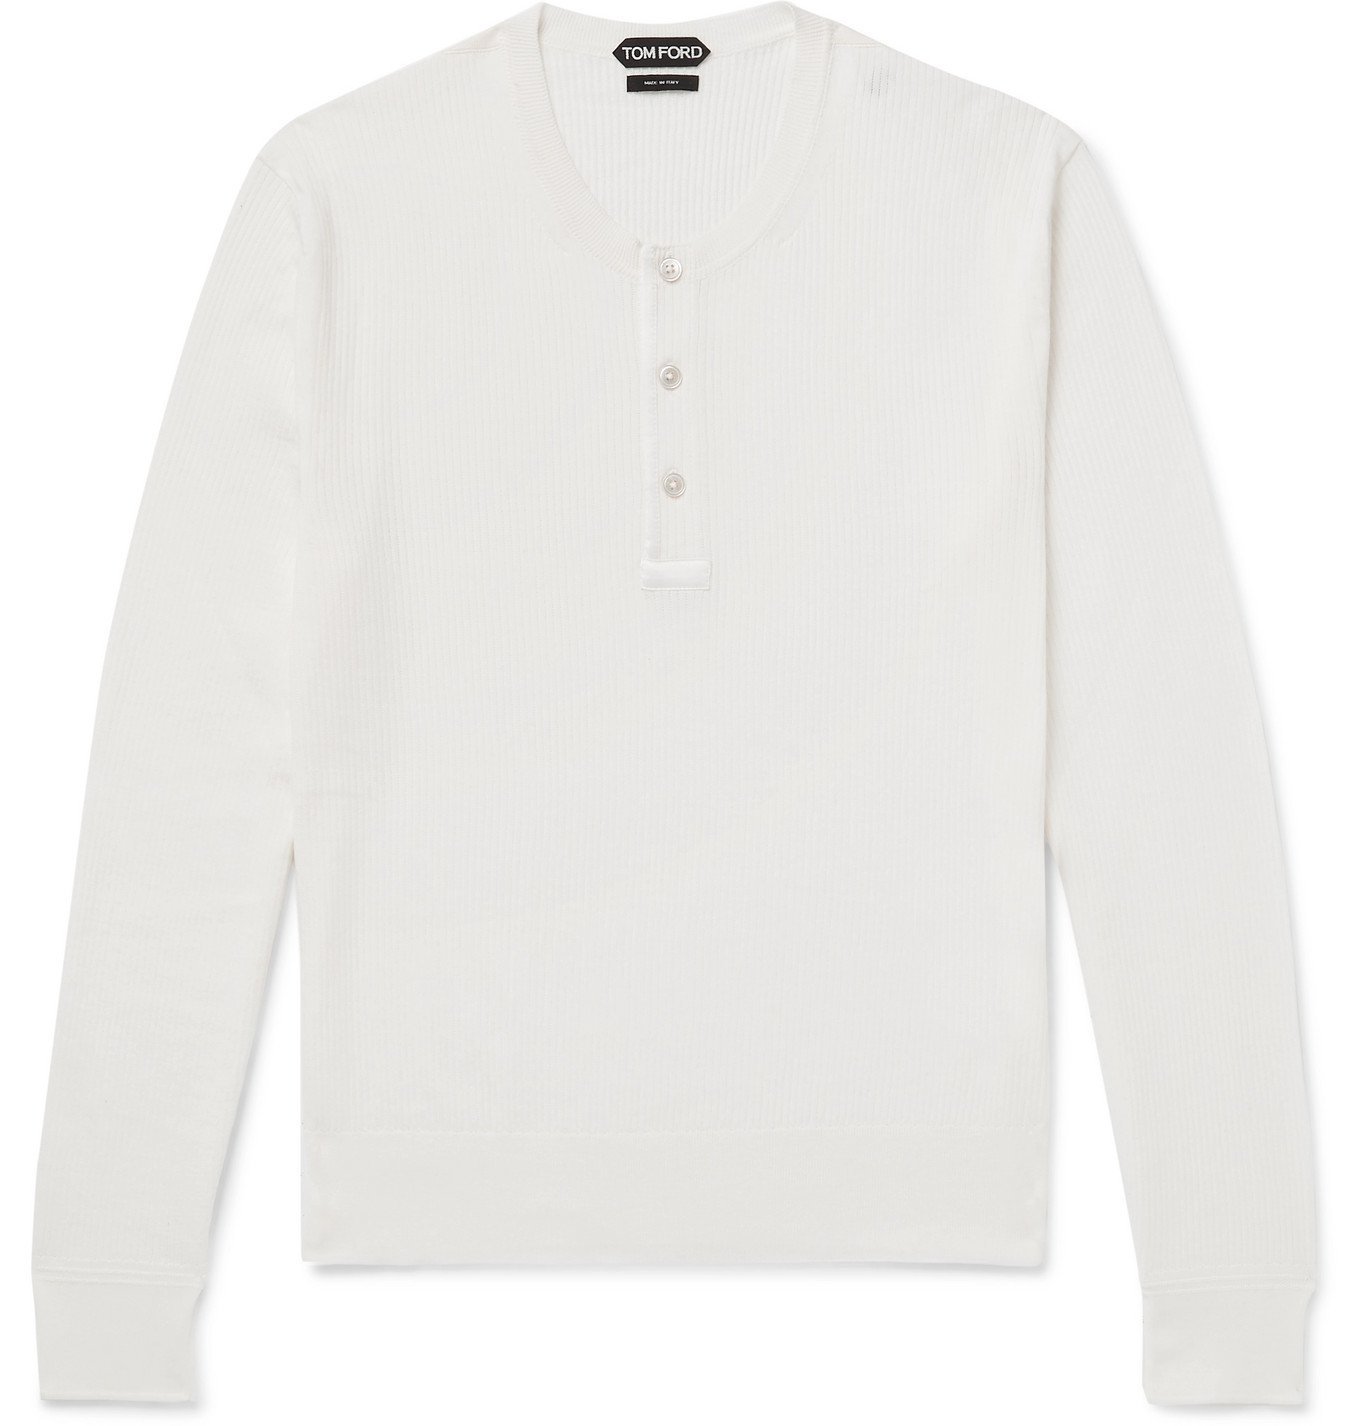 TOM FORD - Slim-Fit Ribbed Cotton and Silk-Blend Henley T-Shirt - White TOM  FORD